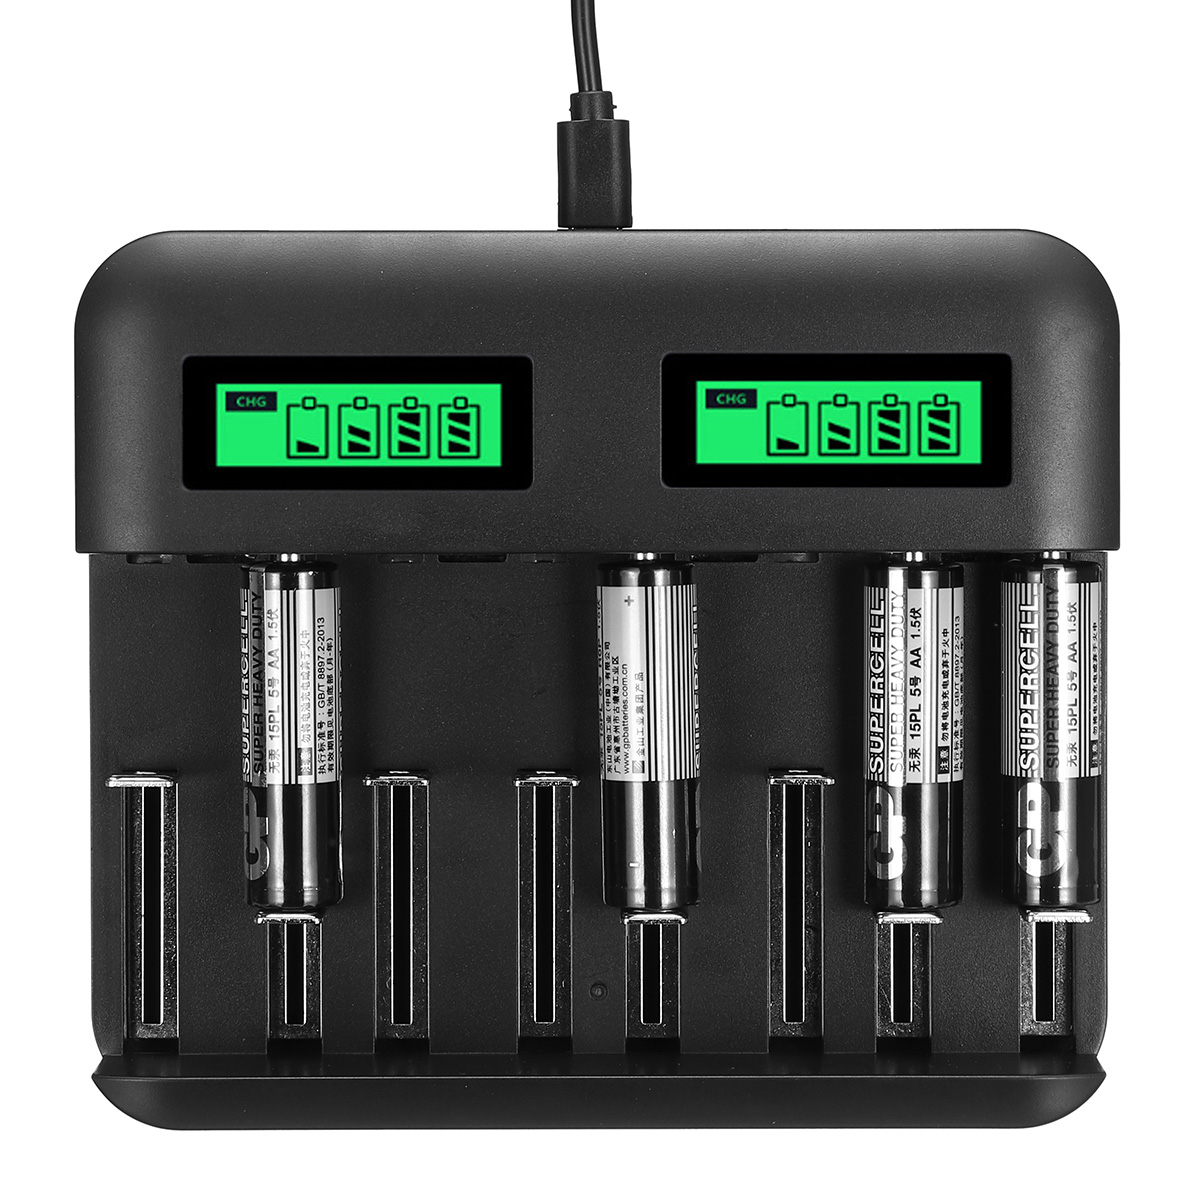 

8 Slots Intelligent LCD Display USB Battery Charger for AA AAA C D Size Battery